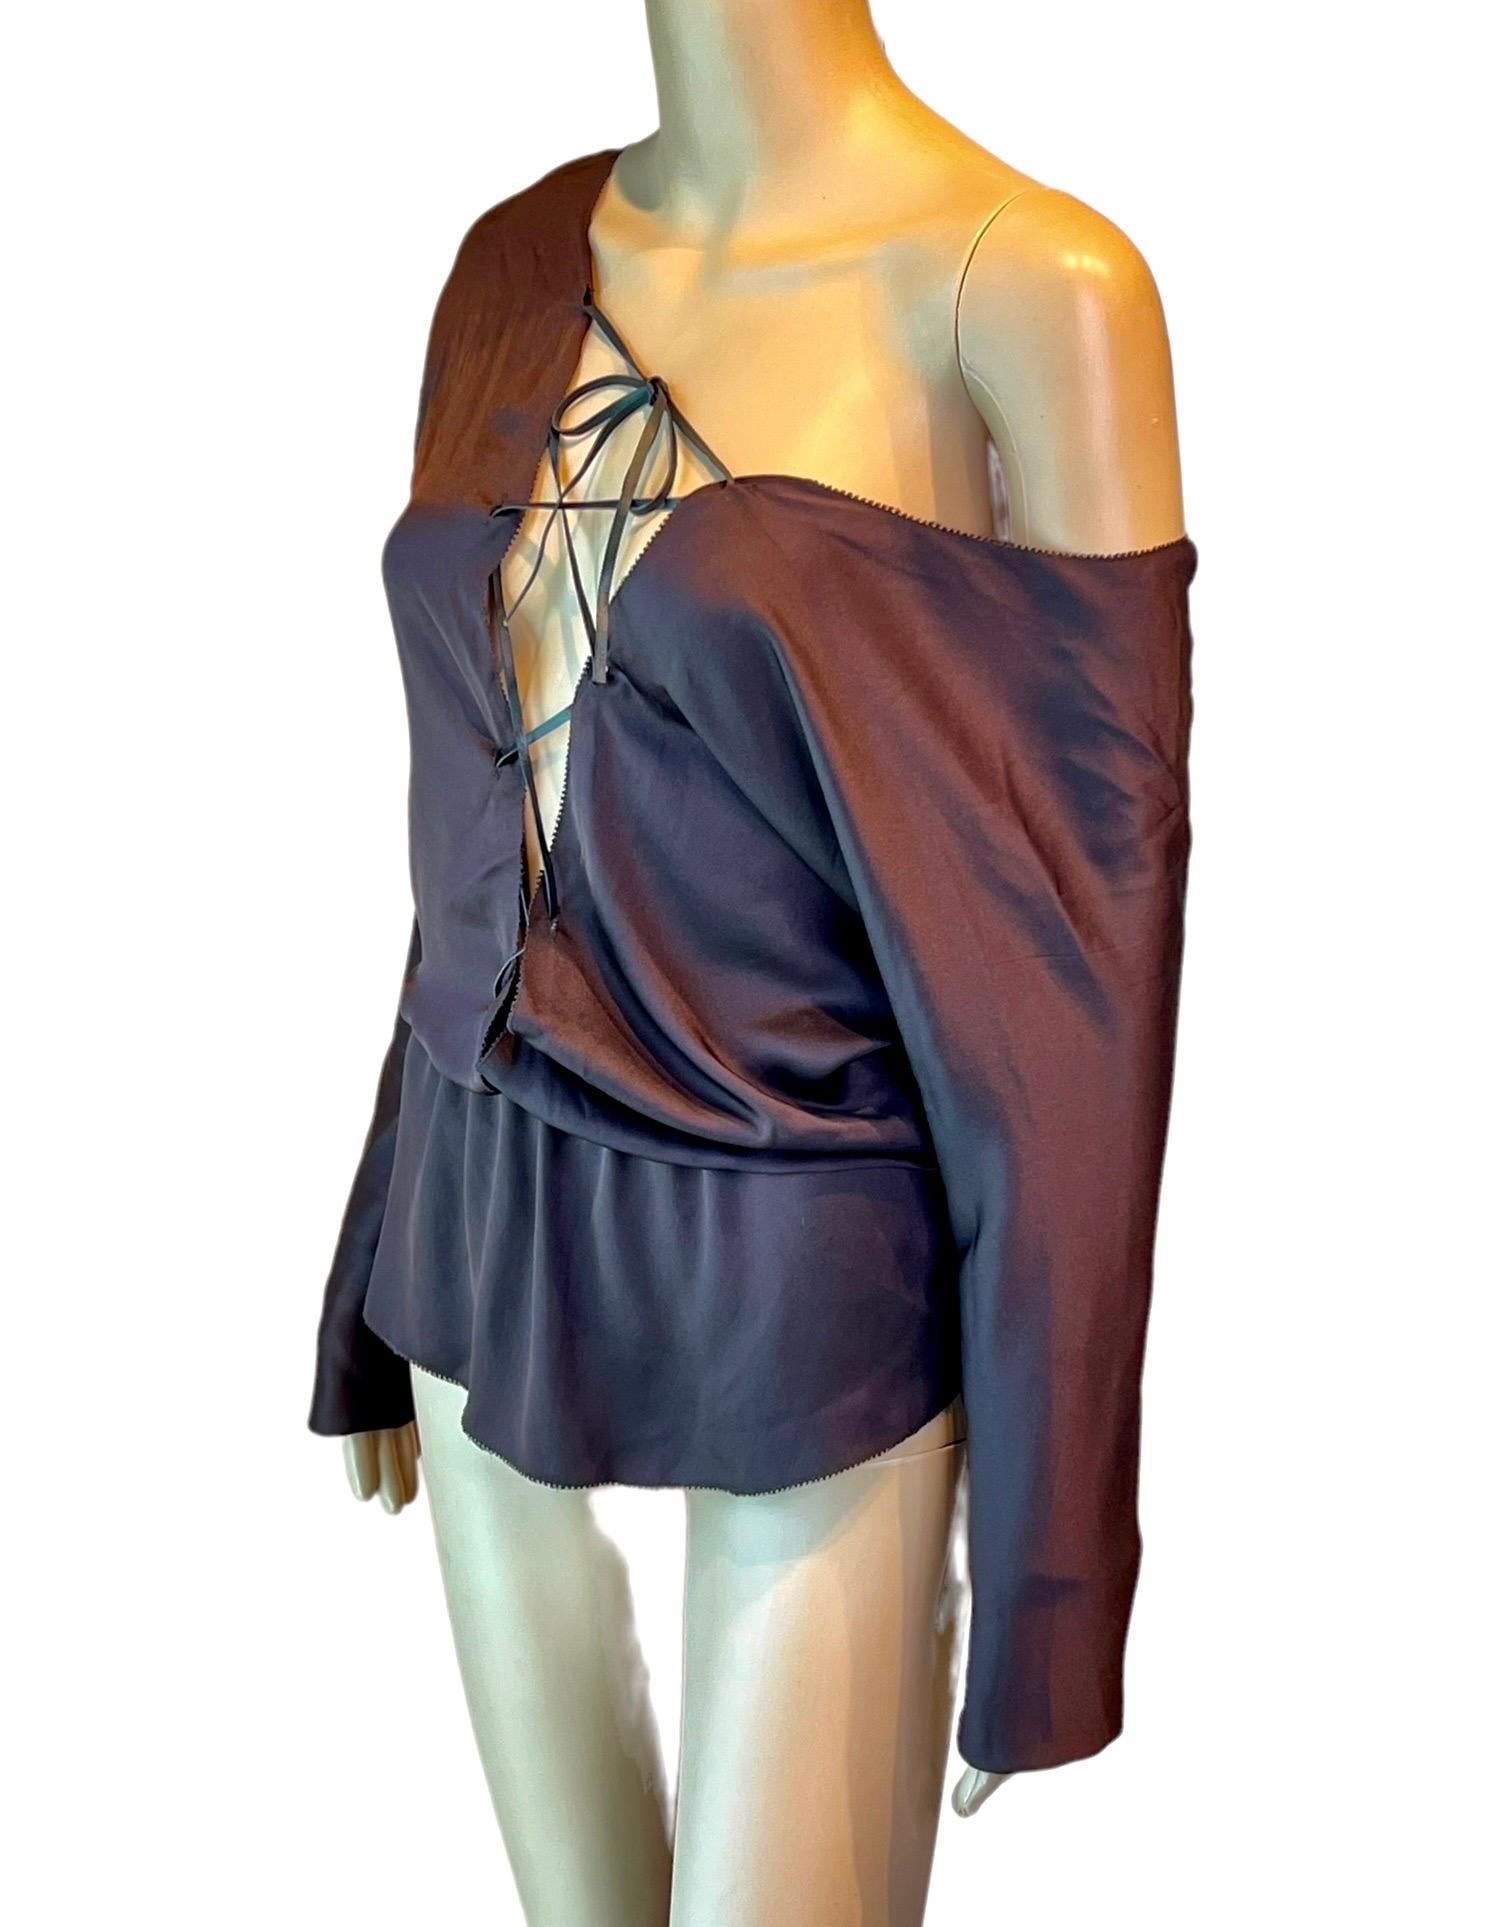 Tom Ford for Gucci F/W 2002 Runway Plunging Silk Lace-Up Brown Blouse Top (chemisier) en vente 4